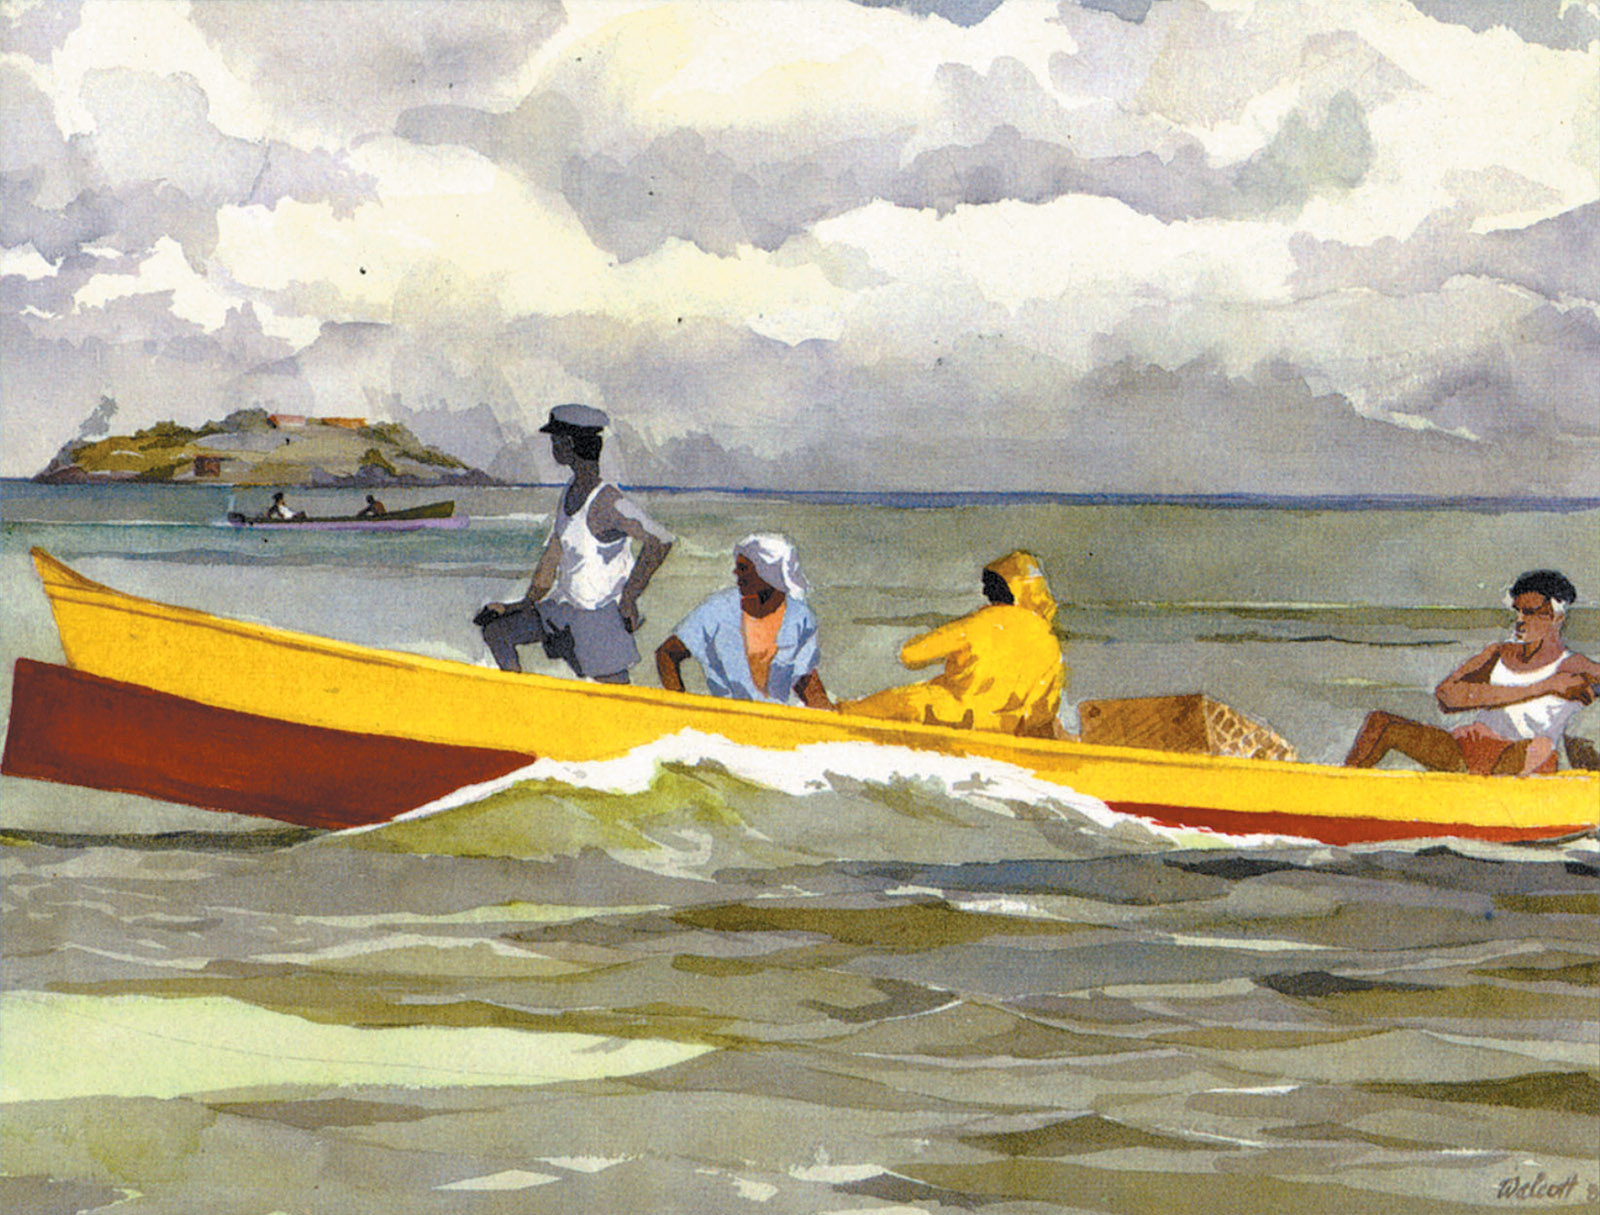 Painting by Derek Walcott, from the cover of his book-length poem Omeros, 1990